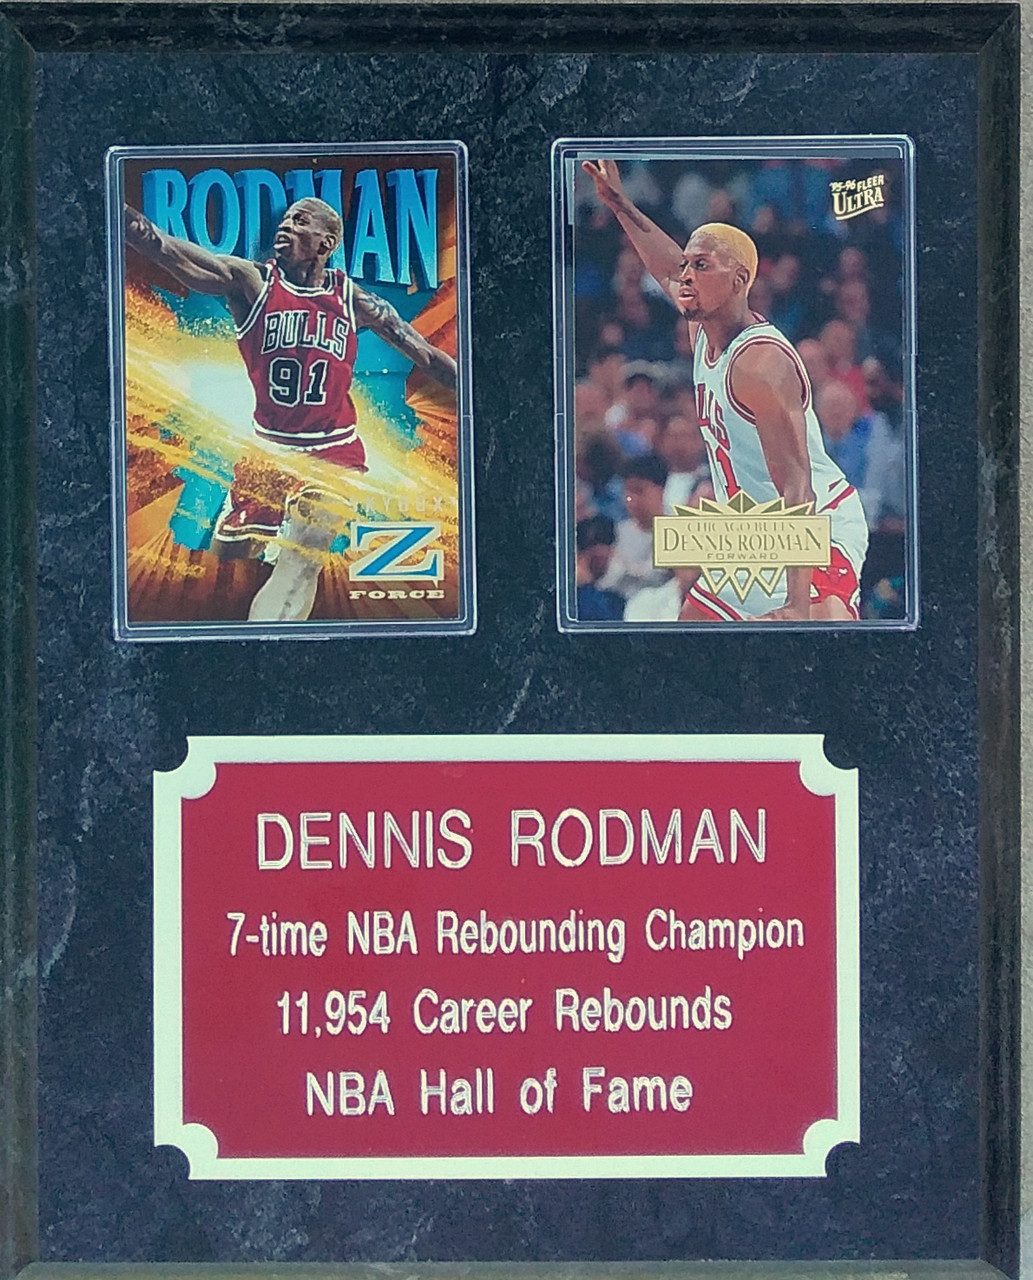 Career Facts and Stats - Dennis Rodman